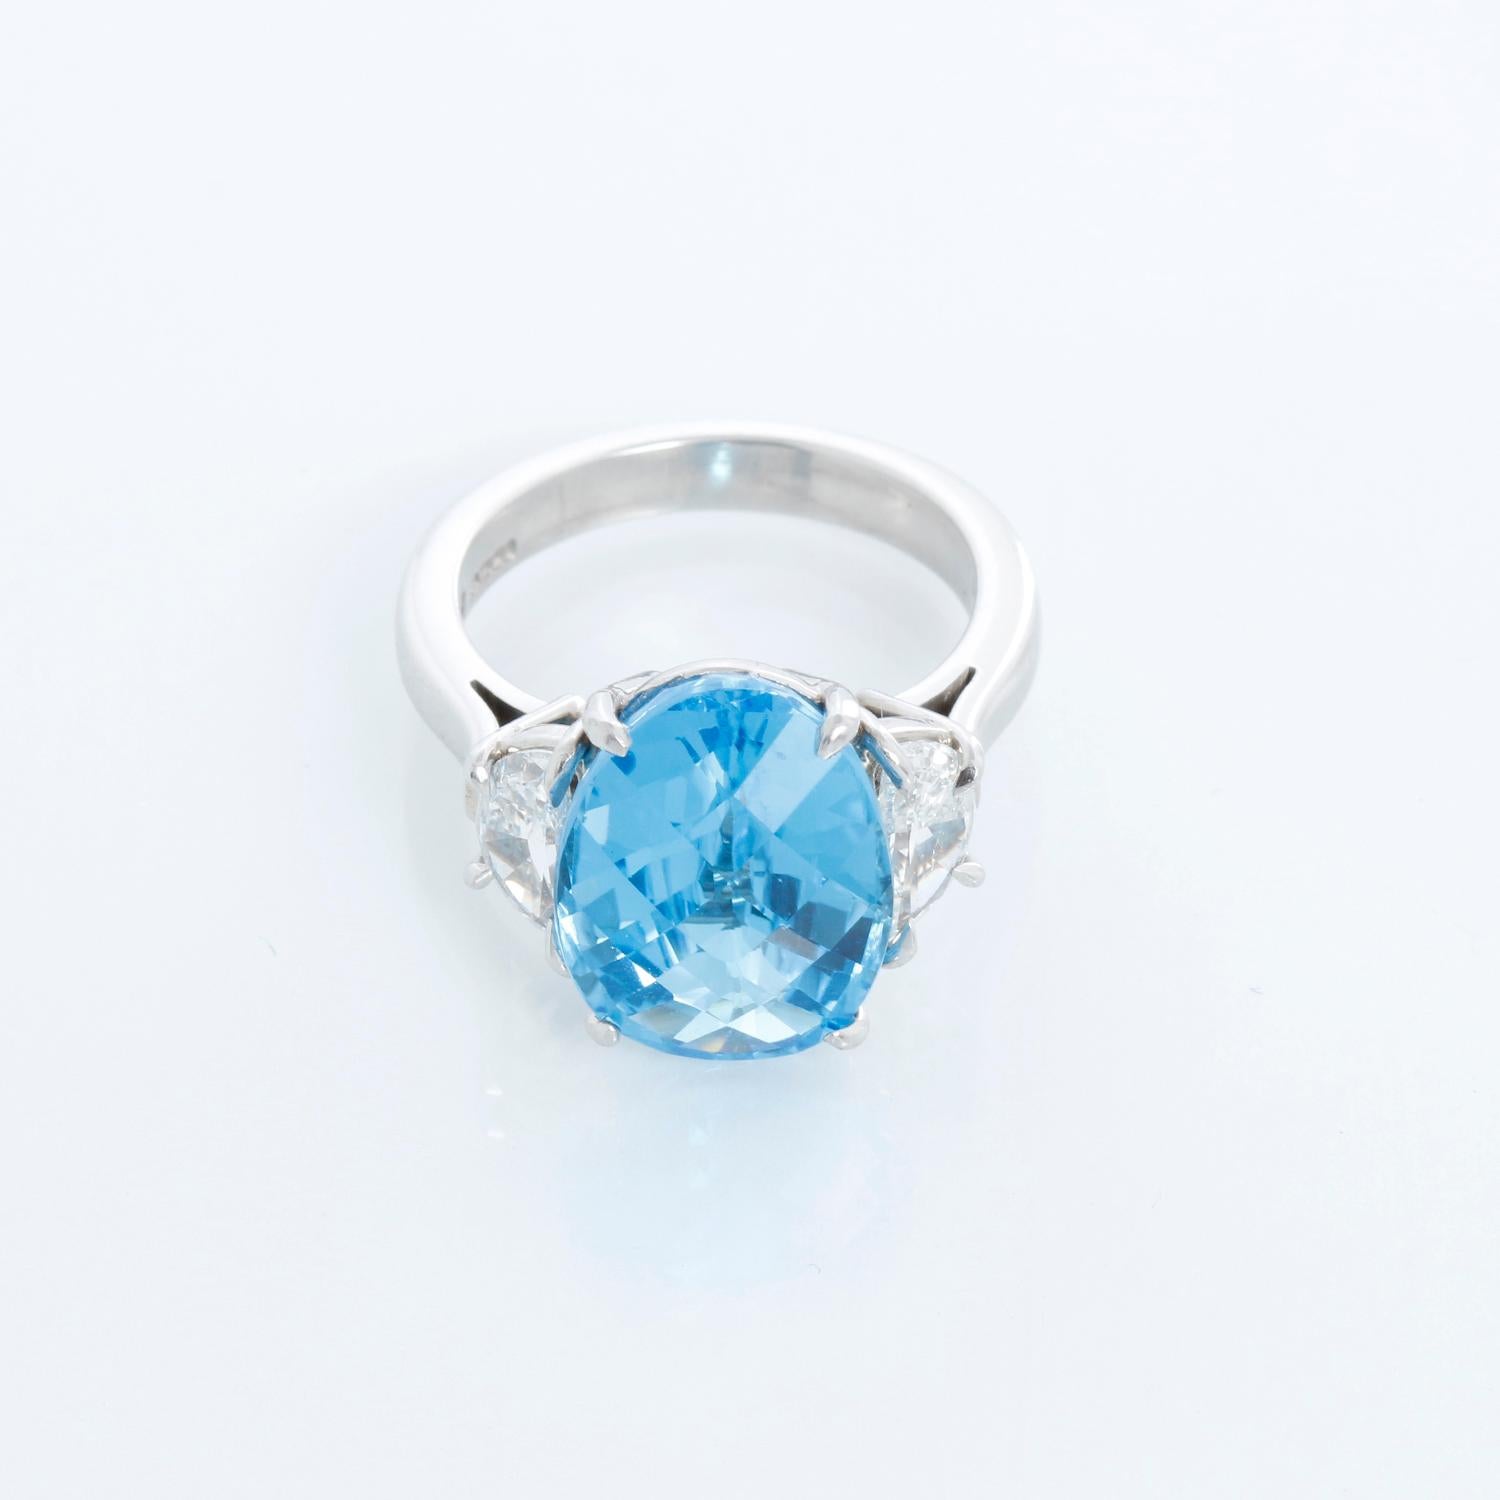 Beautiful blue topaz with two half moon in diamonds. Total carat weight .87. Diamond Color G, Clarity SI1. Topaz size 14.5 mm x 11. New with ring box